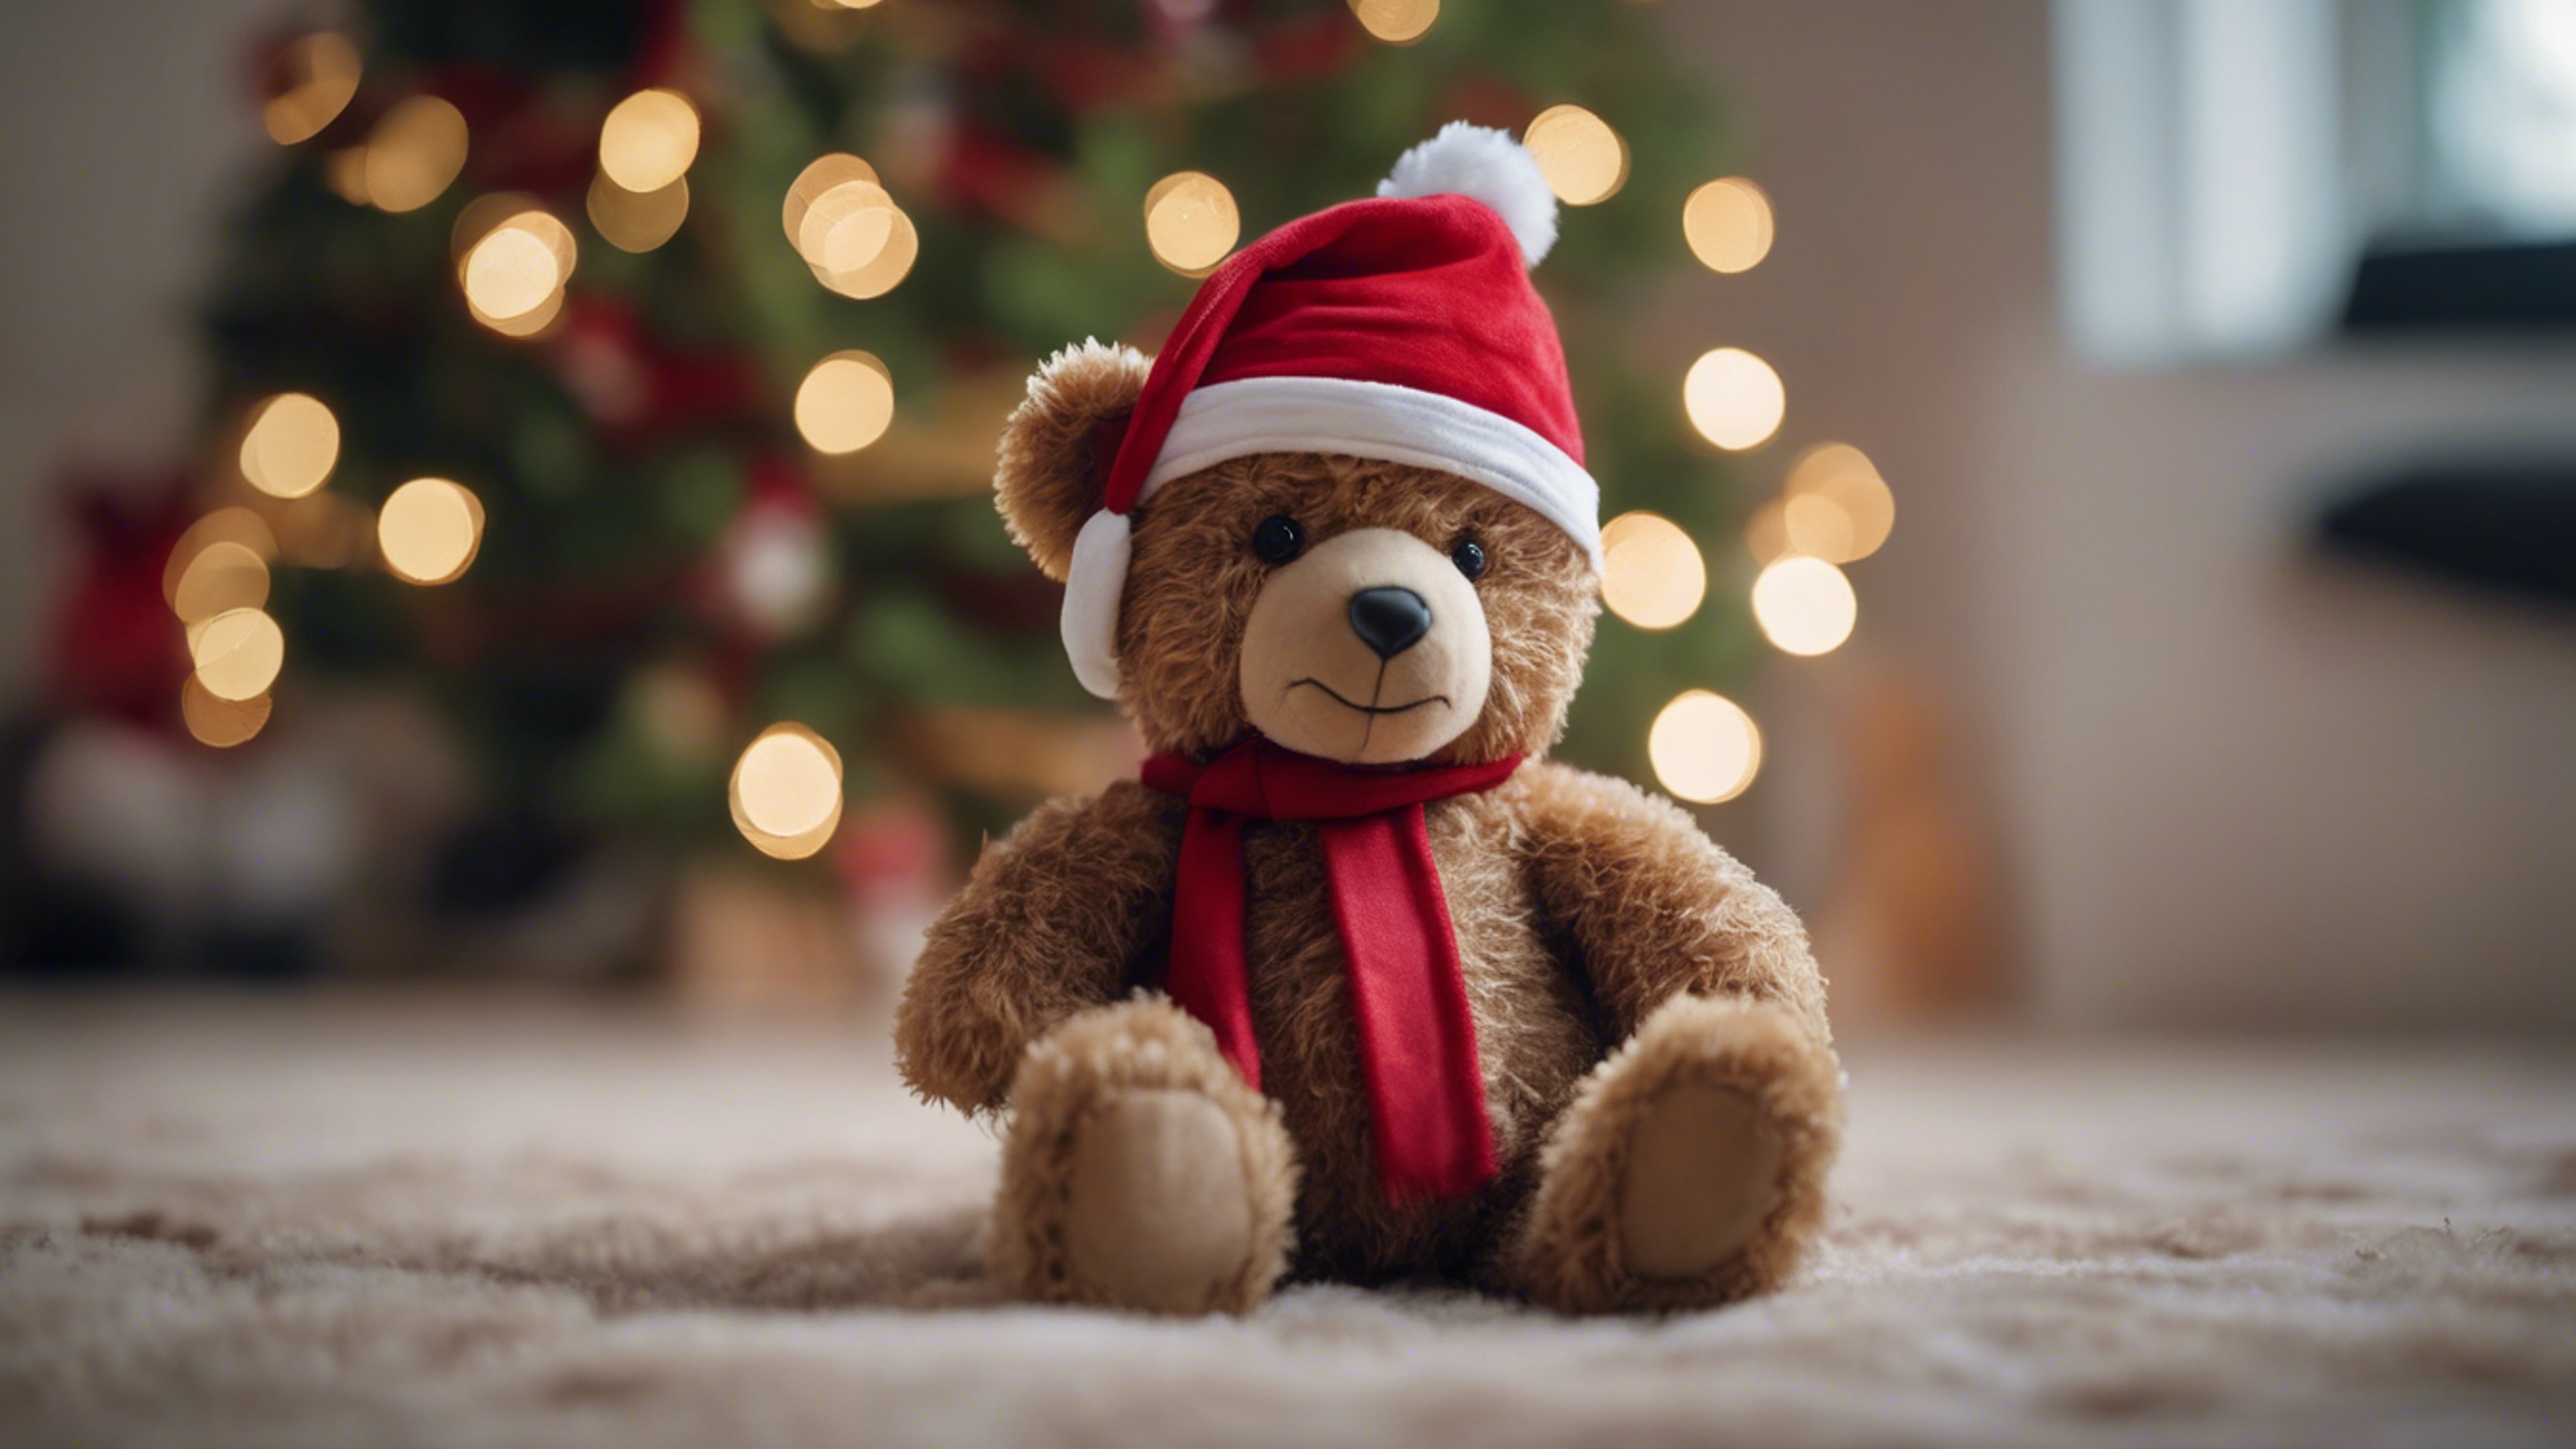 A teddy bear wearing a red Christmas hat, sitting next to a Christmas tree. Tapet[764052ee6d604b67a698]